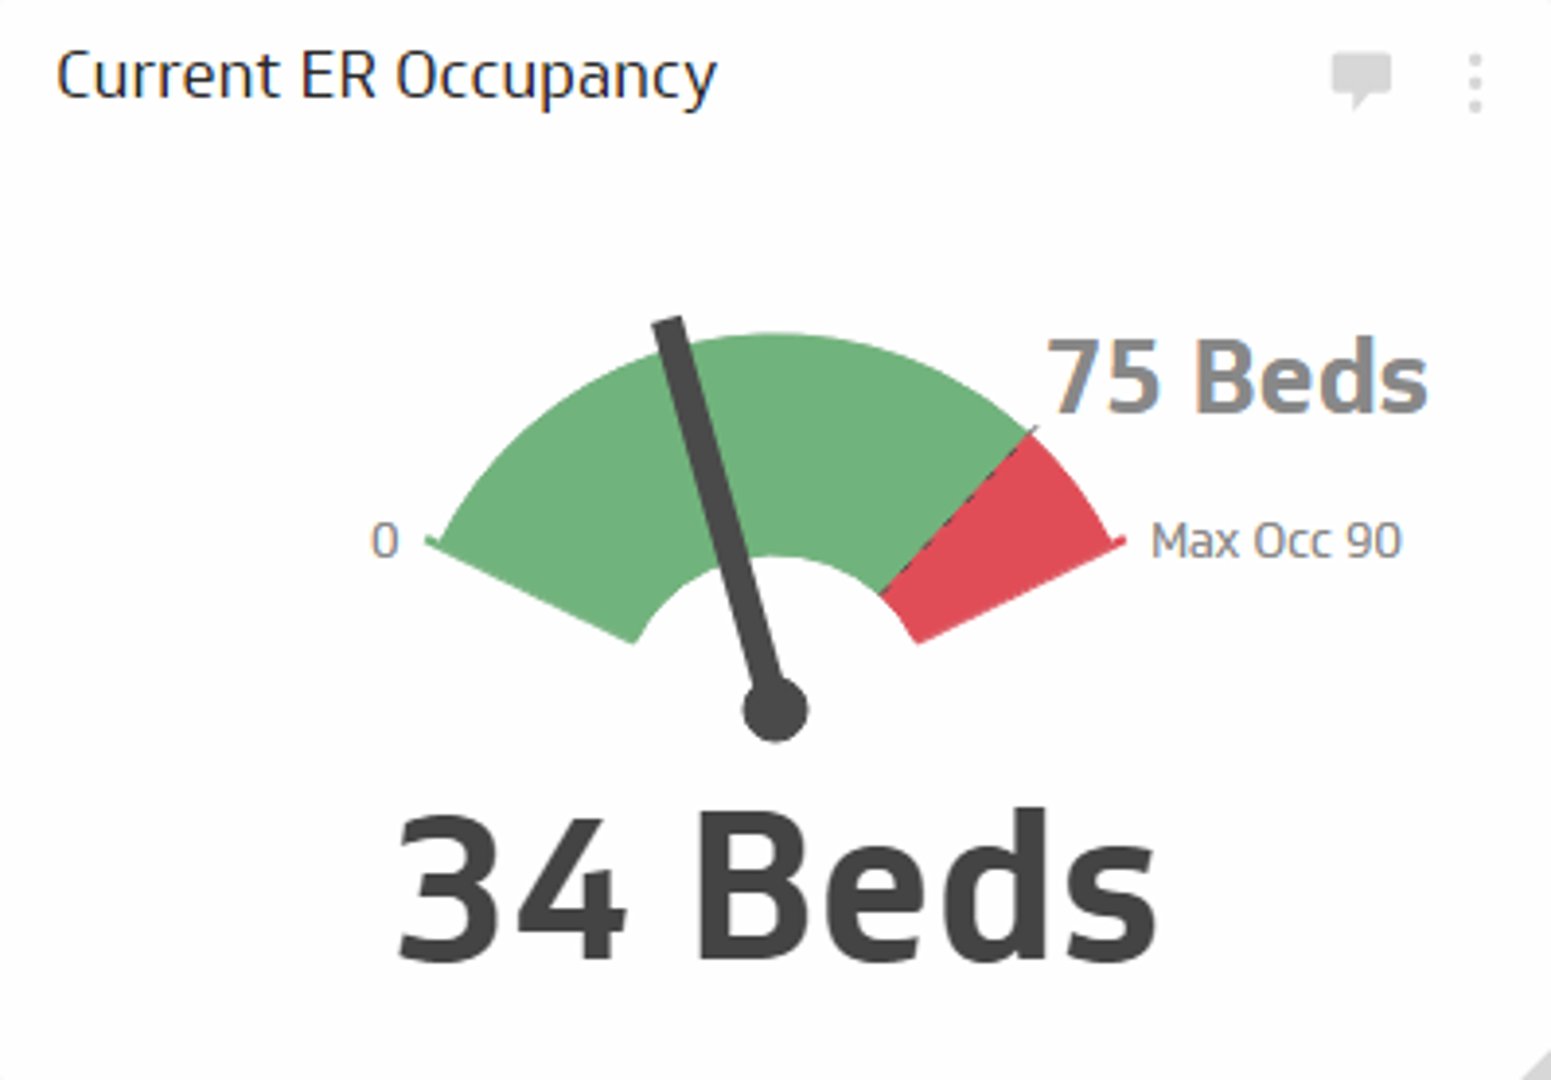 Related KPI Examples - Current ER Occupancy Metric